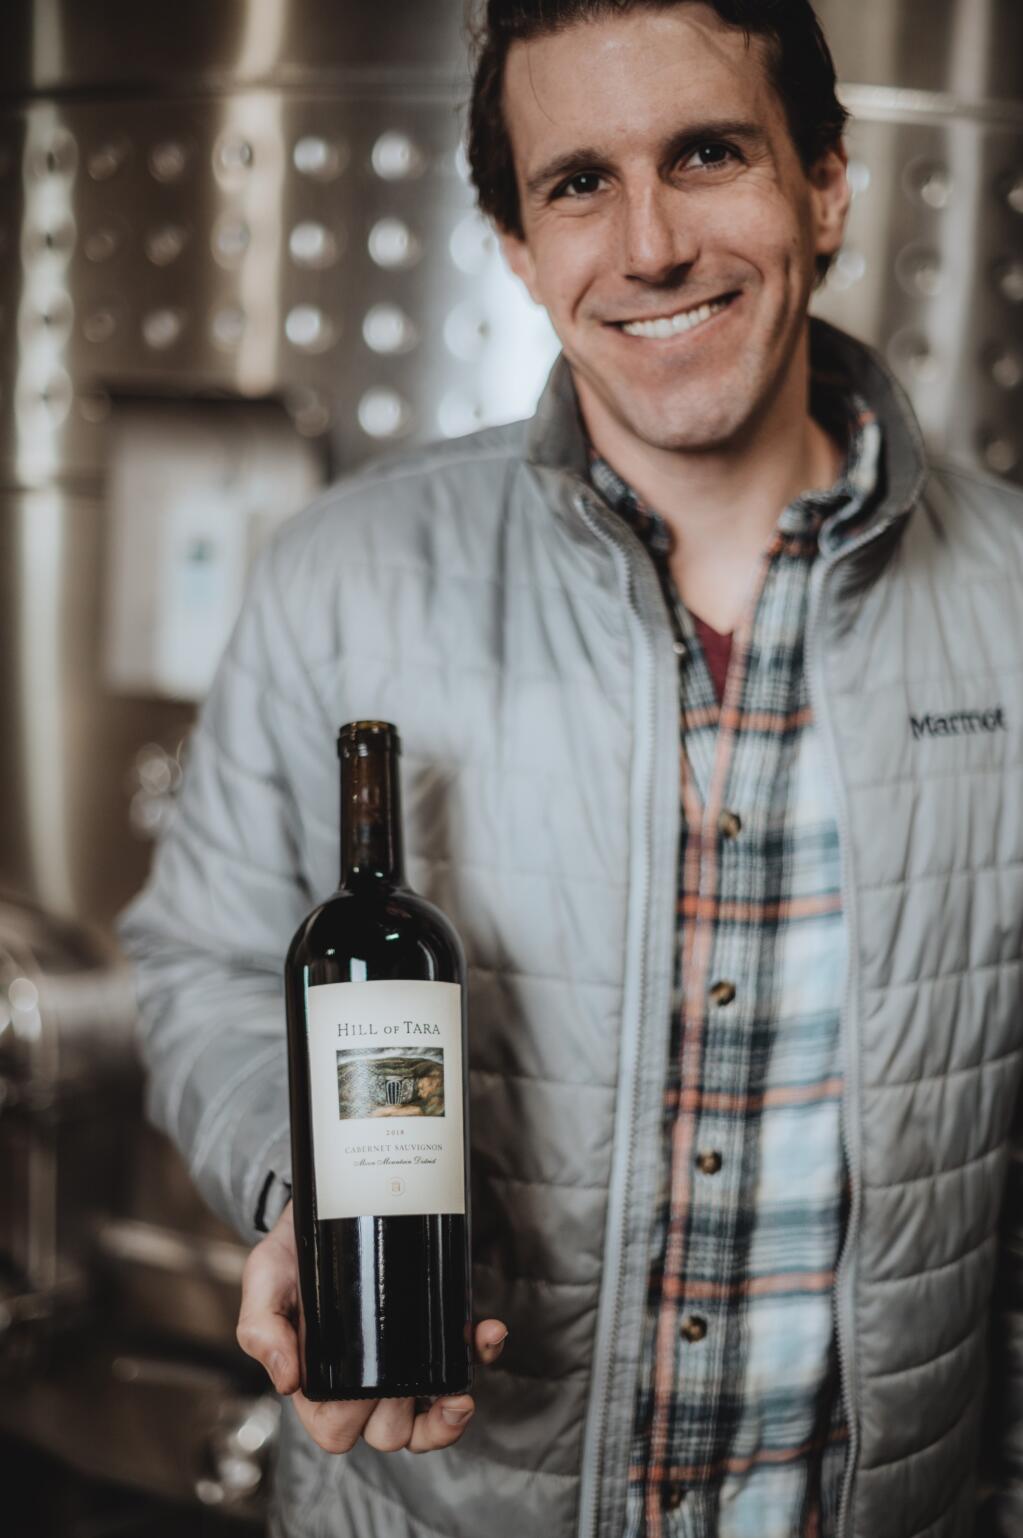 Alex Kanzler holds a bottle of 2018 Hill of Tara wine, his first vintage with the winery. (courtesy of Hill of Tara Wines)